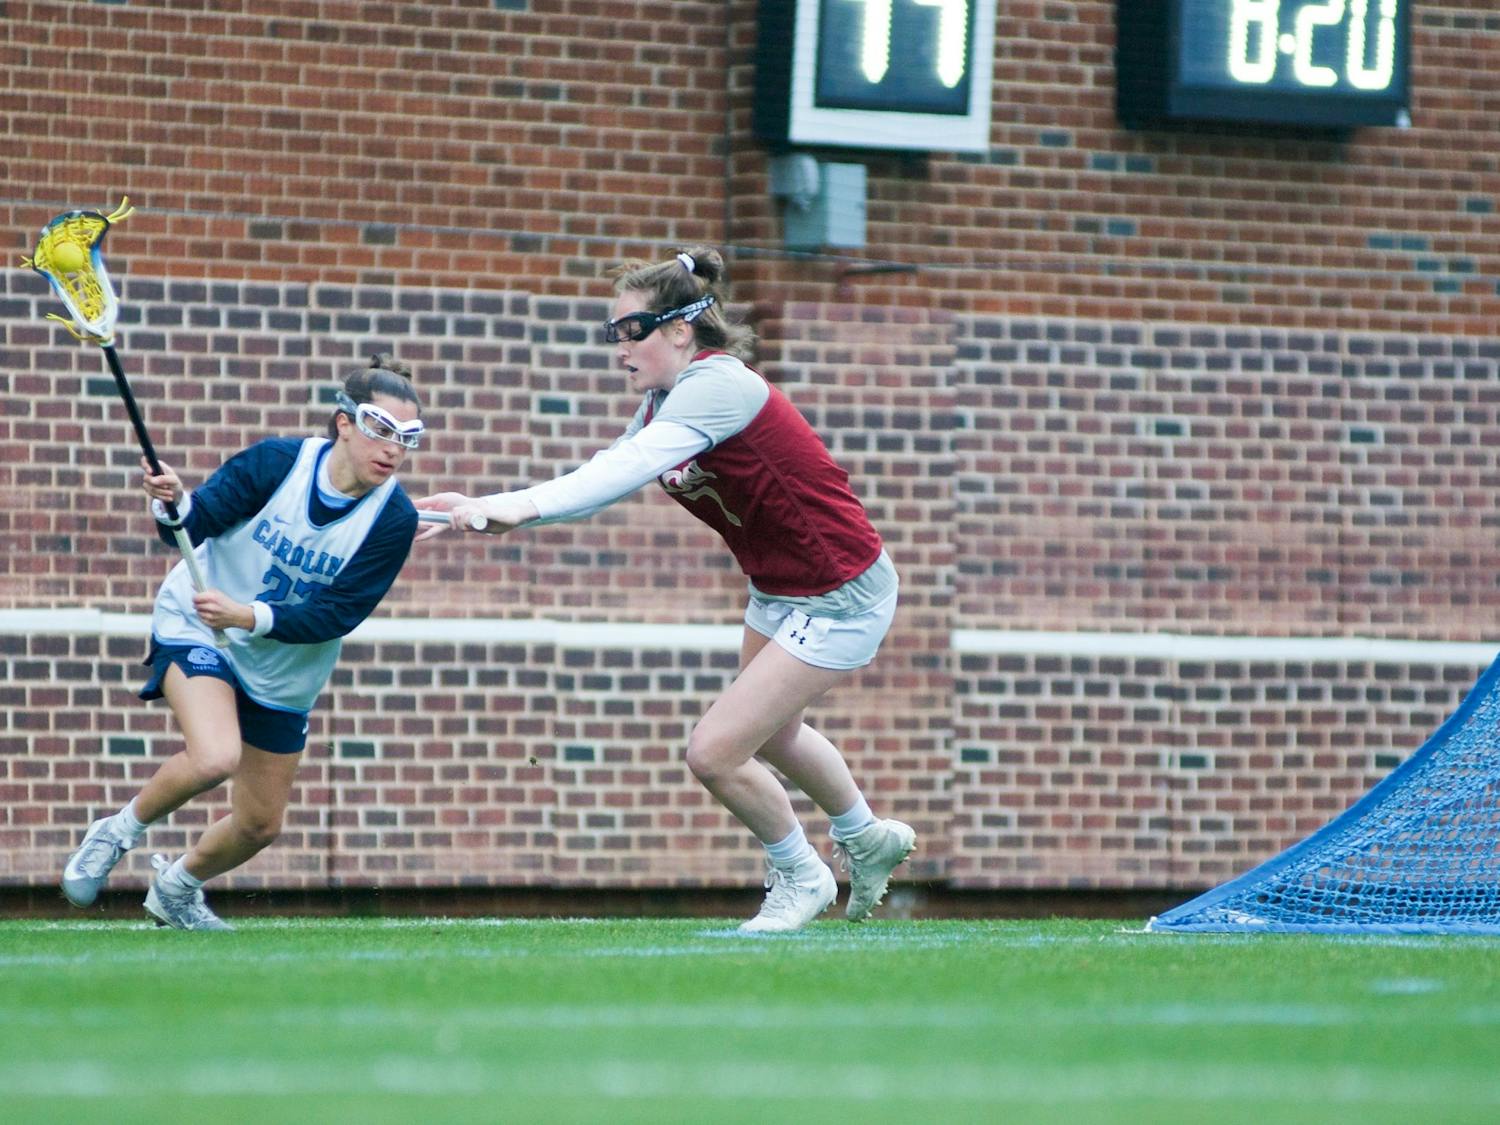 UNC senior midfielder Marisa Divietro (27) charges past Elon freshman defender Hannah Mccarthy (7) to attempt a shot on goal. The Tar Heels would start off the season with a 20-3 victory over Elon during the exhibition match on Feb. 1, 2020, at Dorrance Field. 